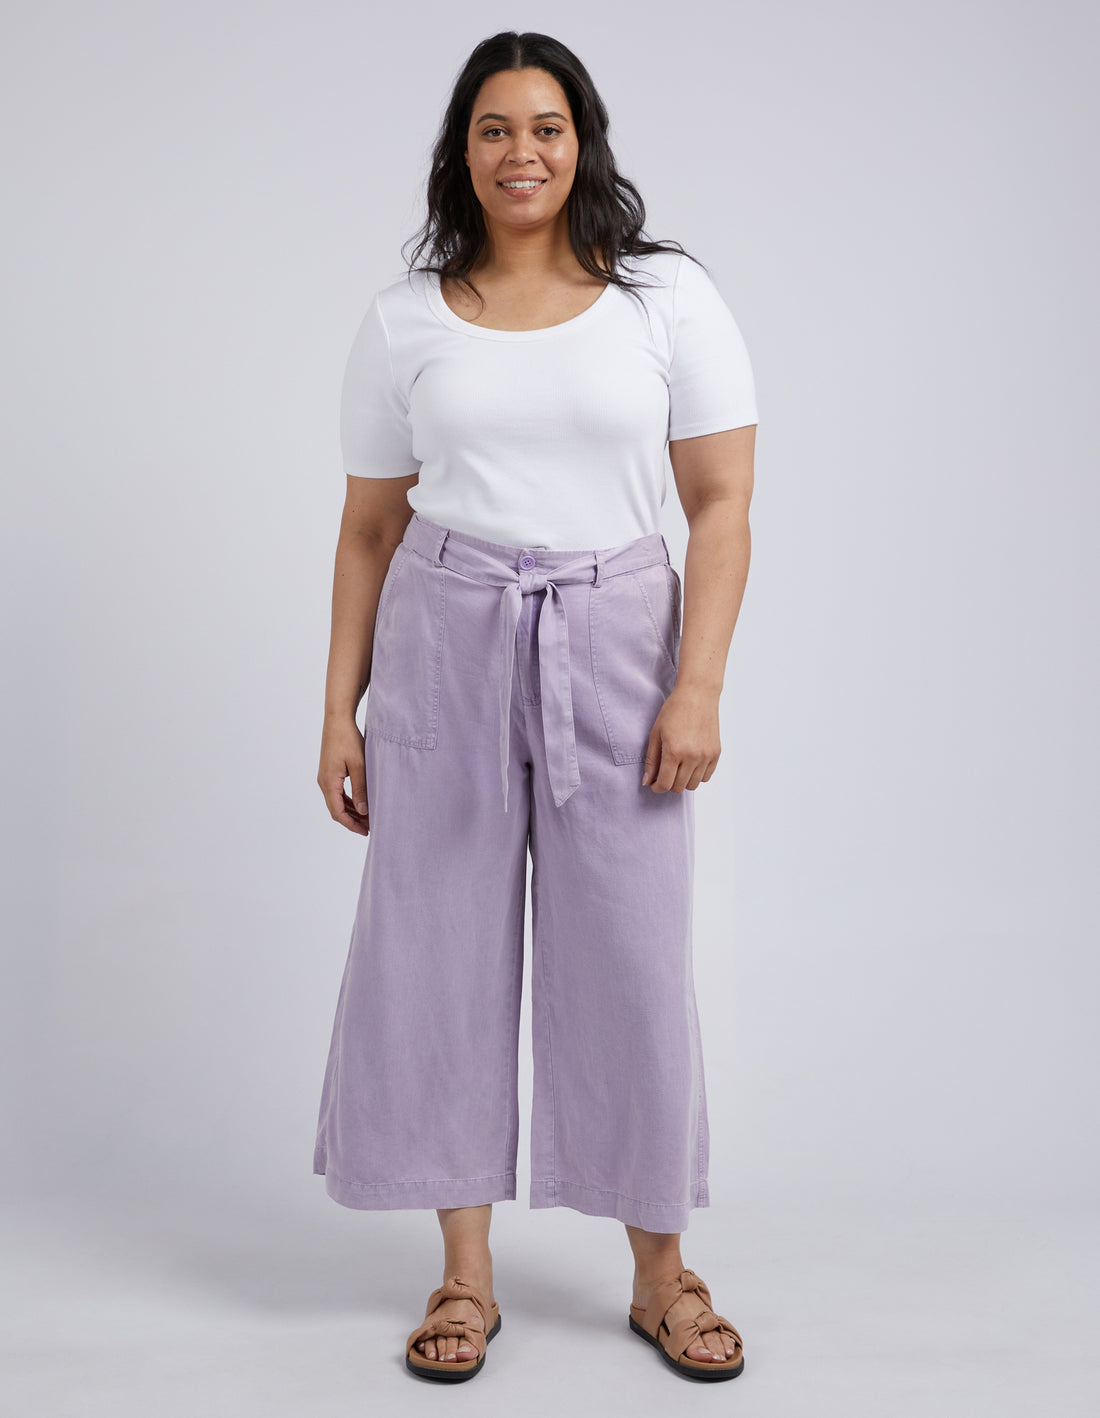 Bliss pant periwinkle